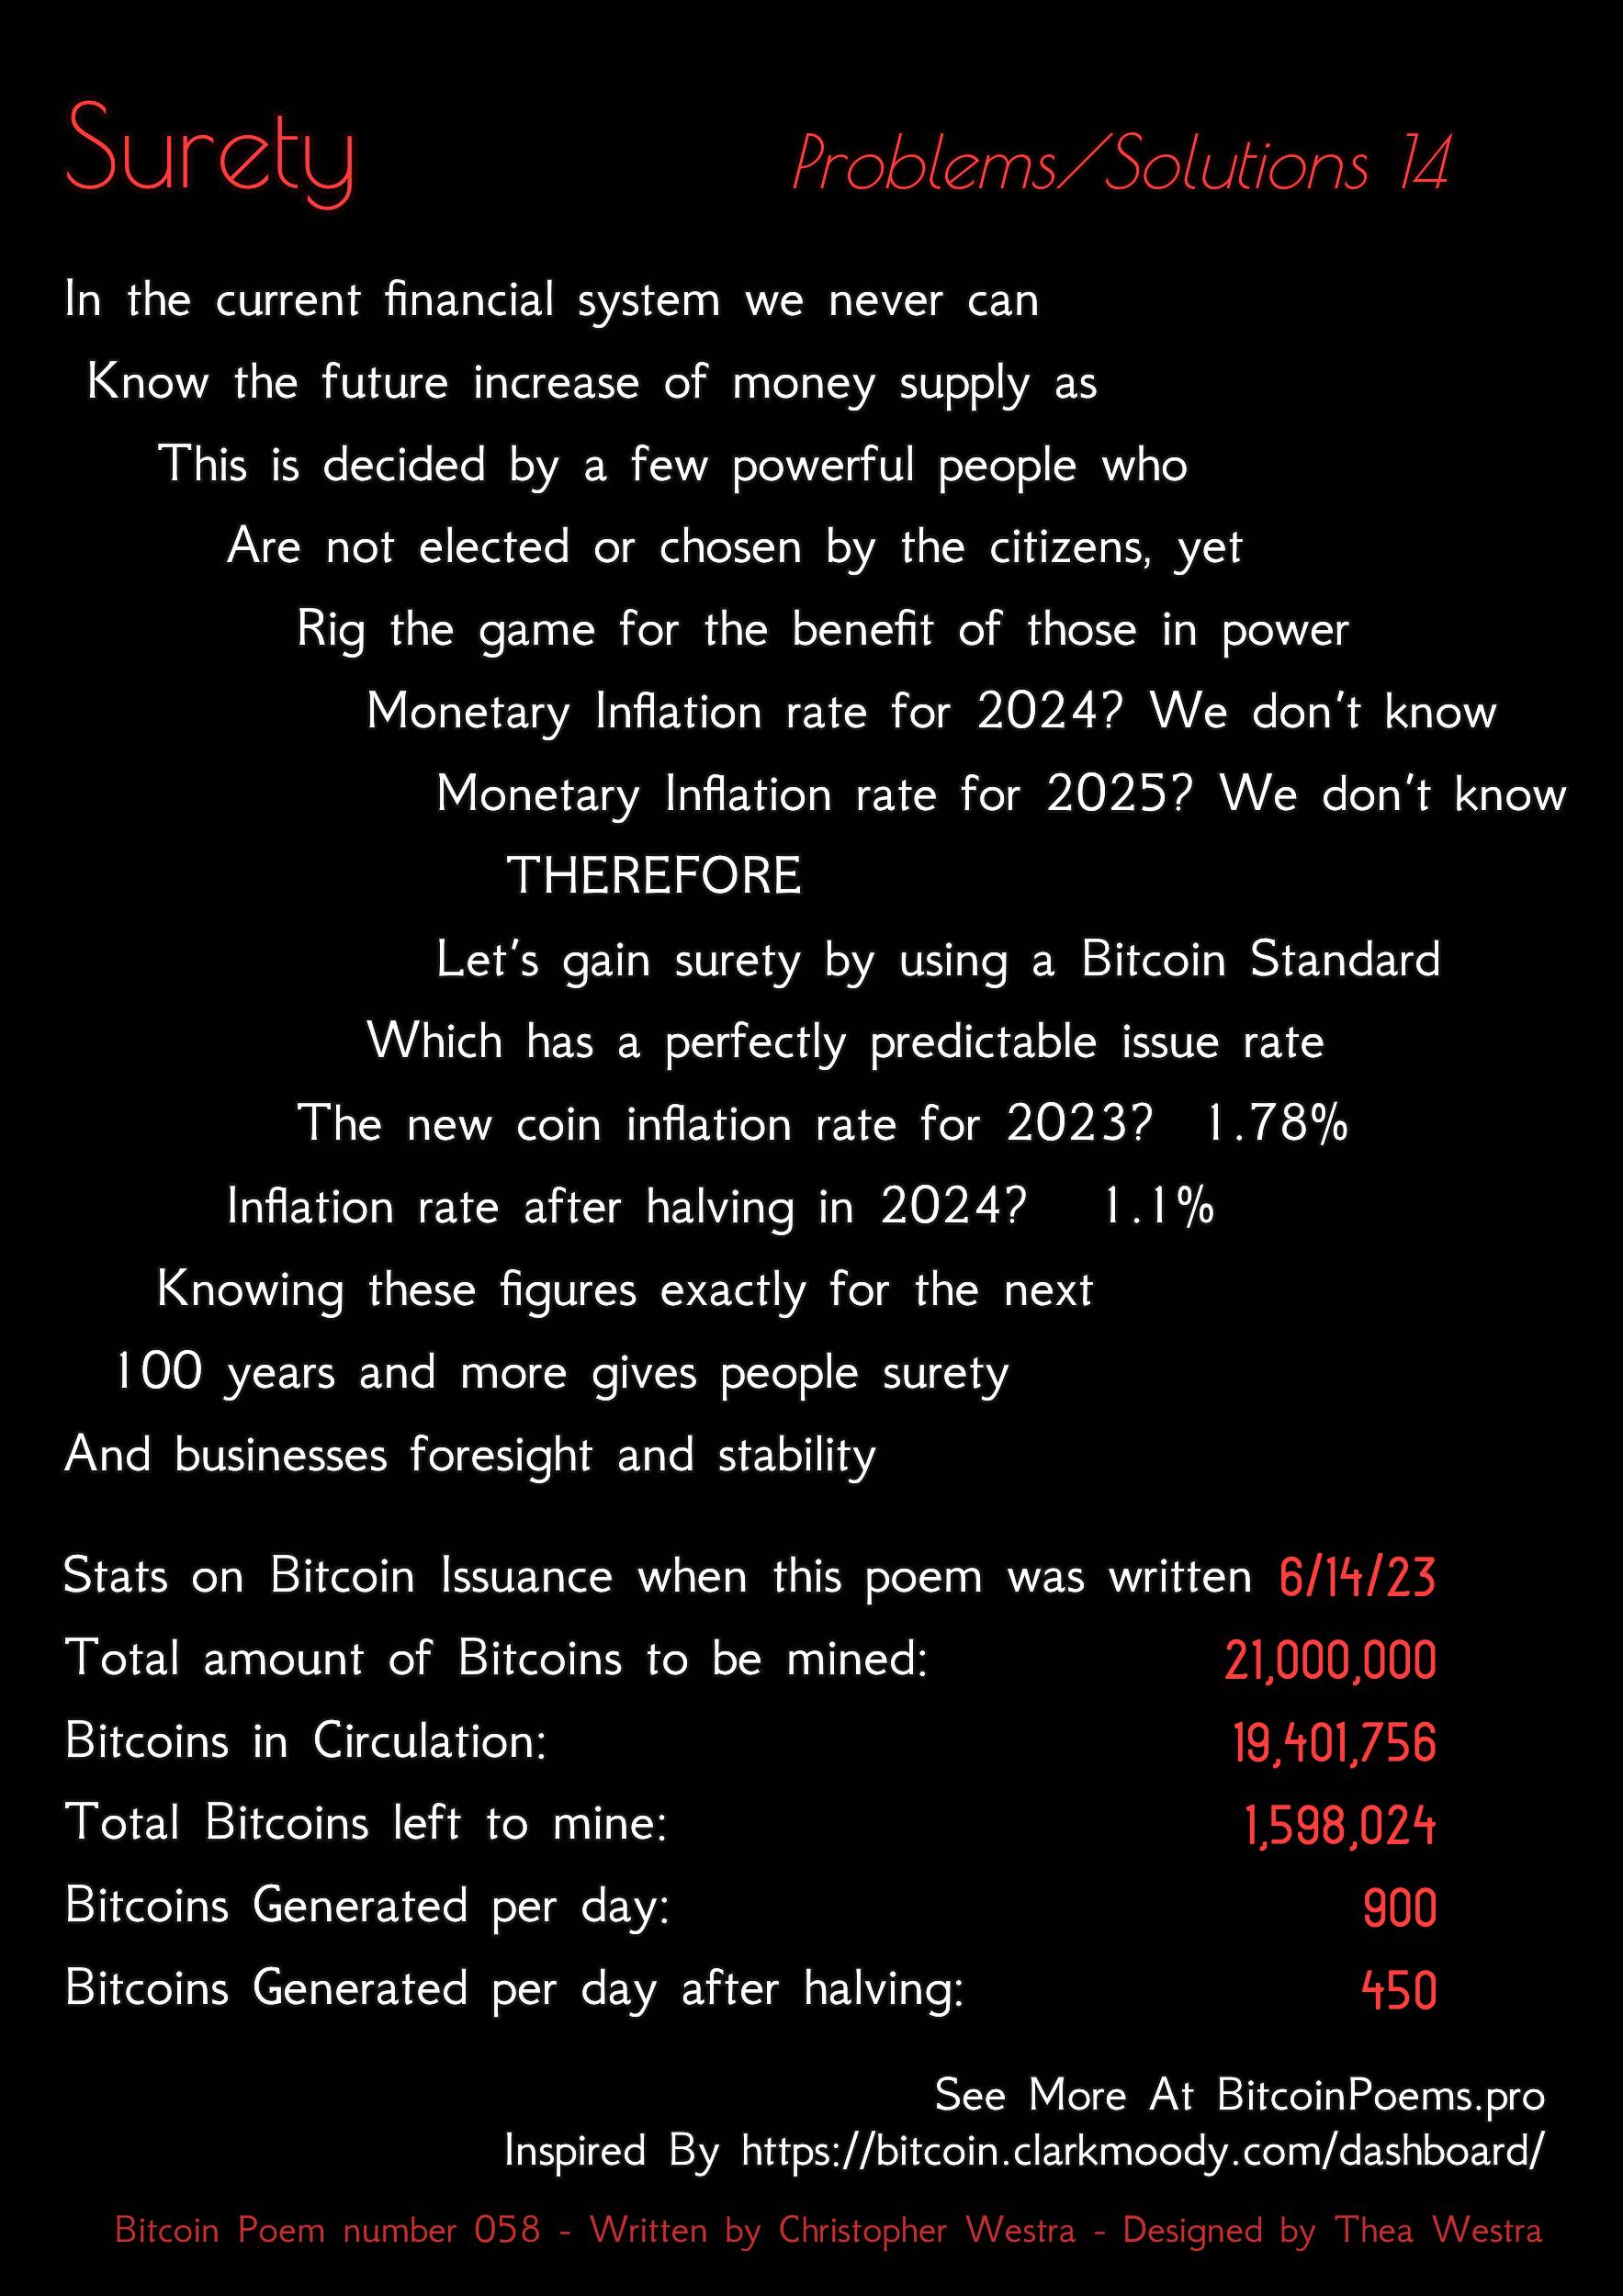 Surety - Bitcoin Poem 058 by Christopher Westra